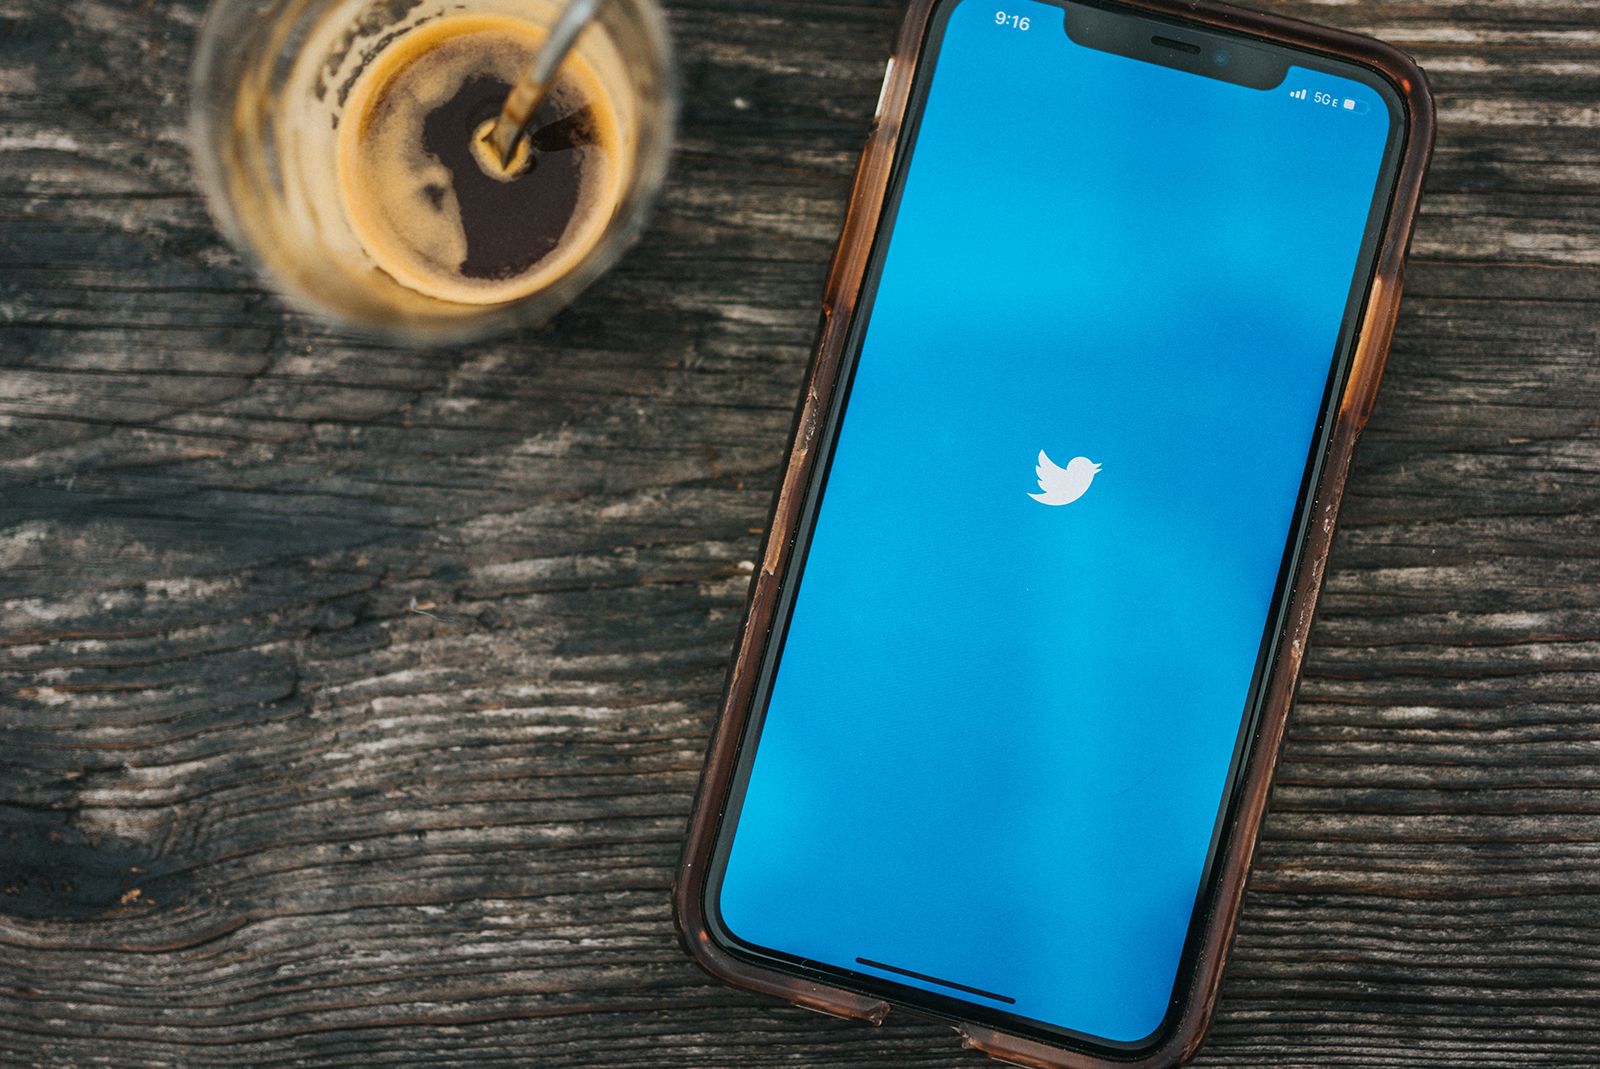 Twitter reportedly working on a feature that allows users to write full articles photo 1